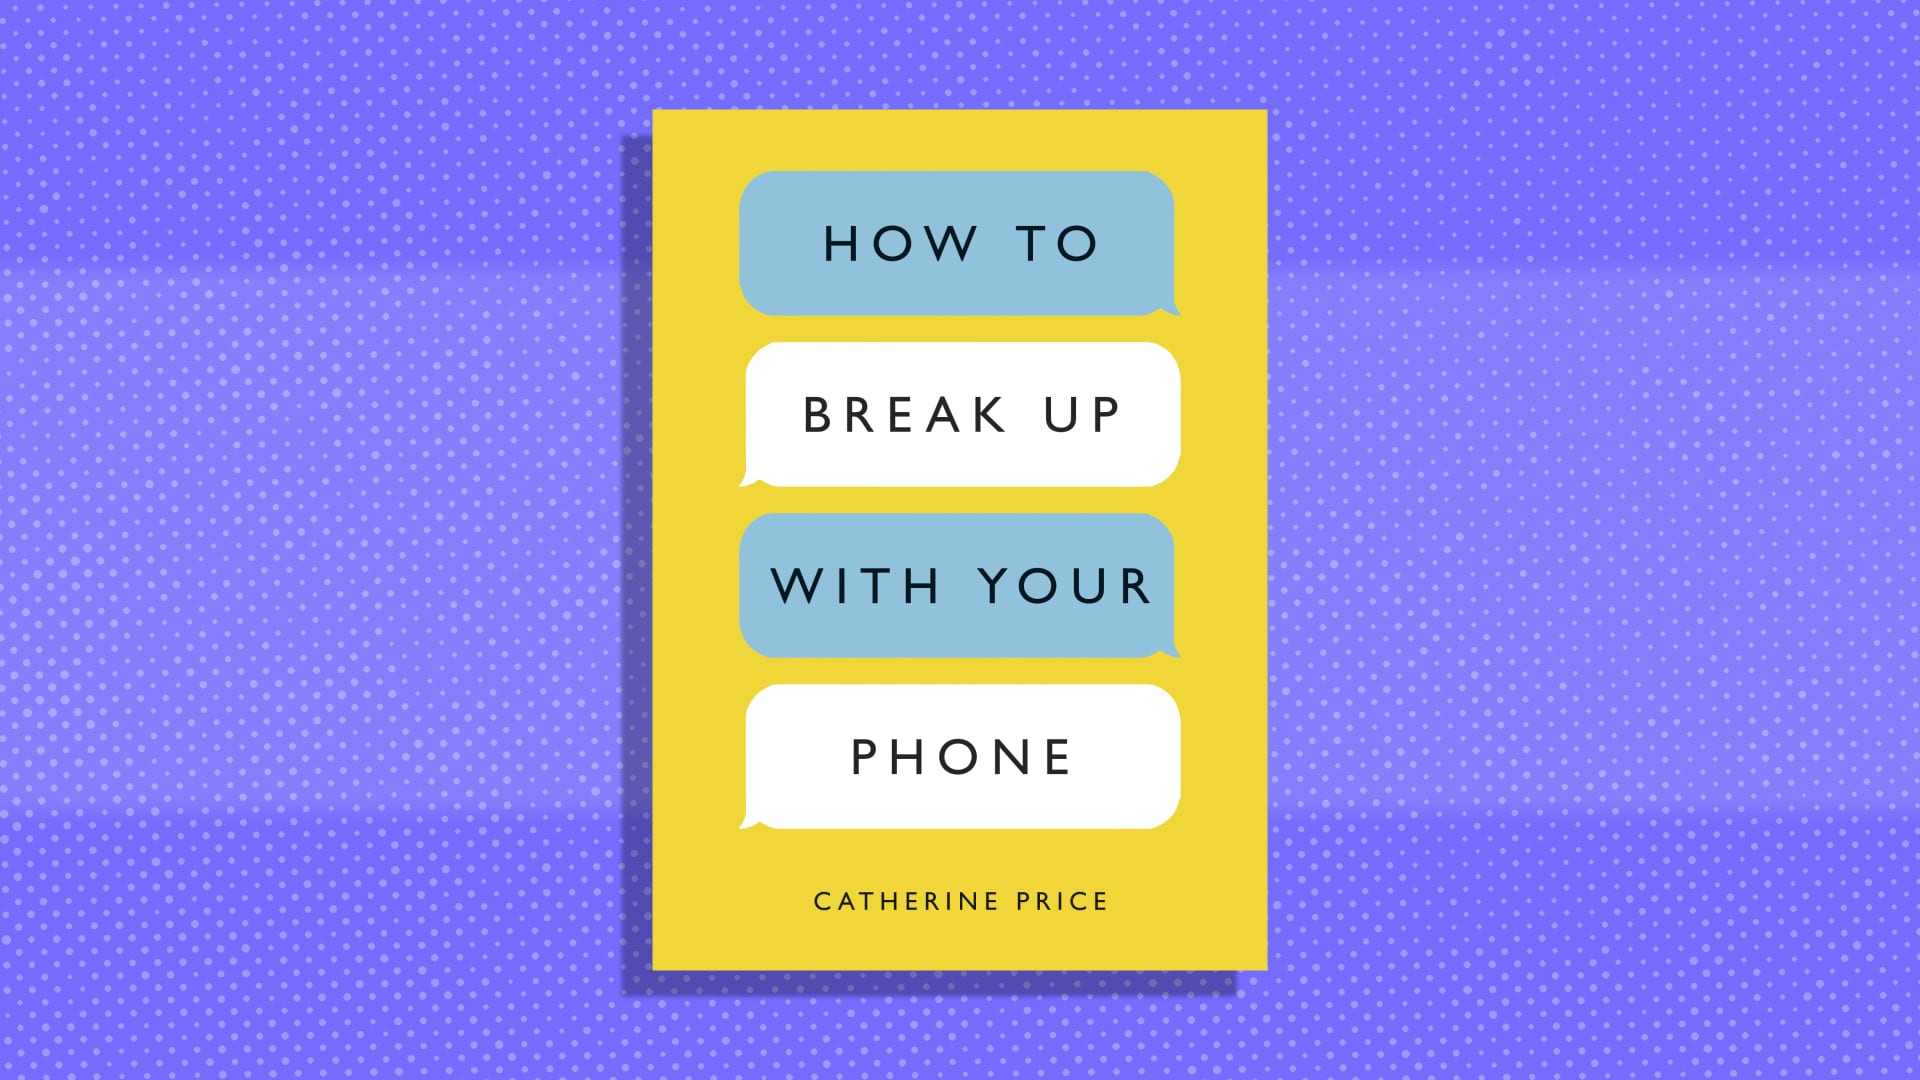 This 1-minute practice can help you ‘break up with your phone,’ says author who wrote the book on it